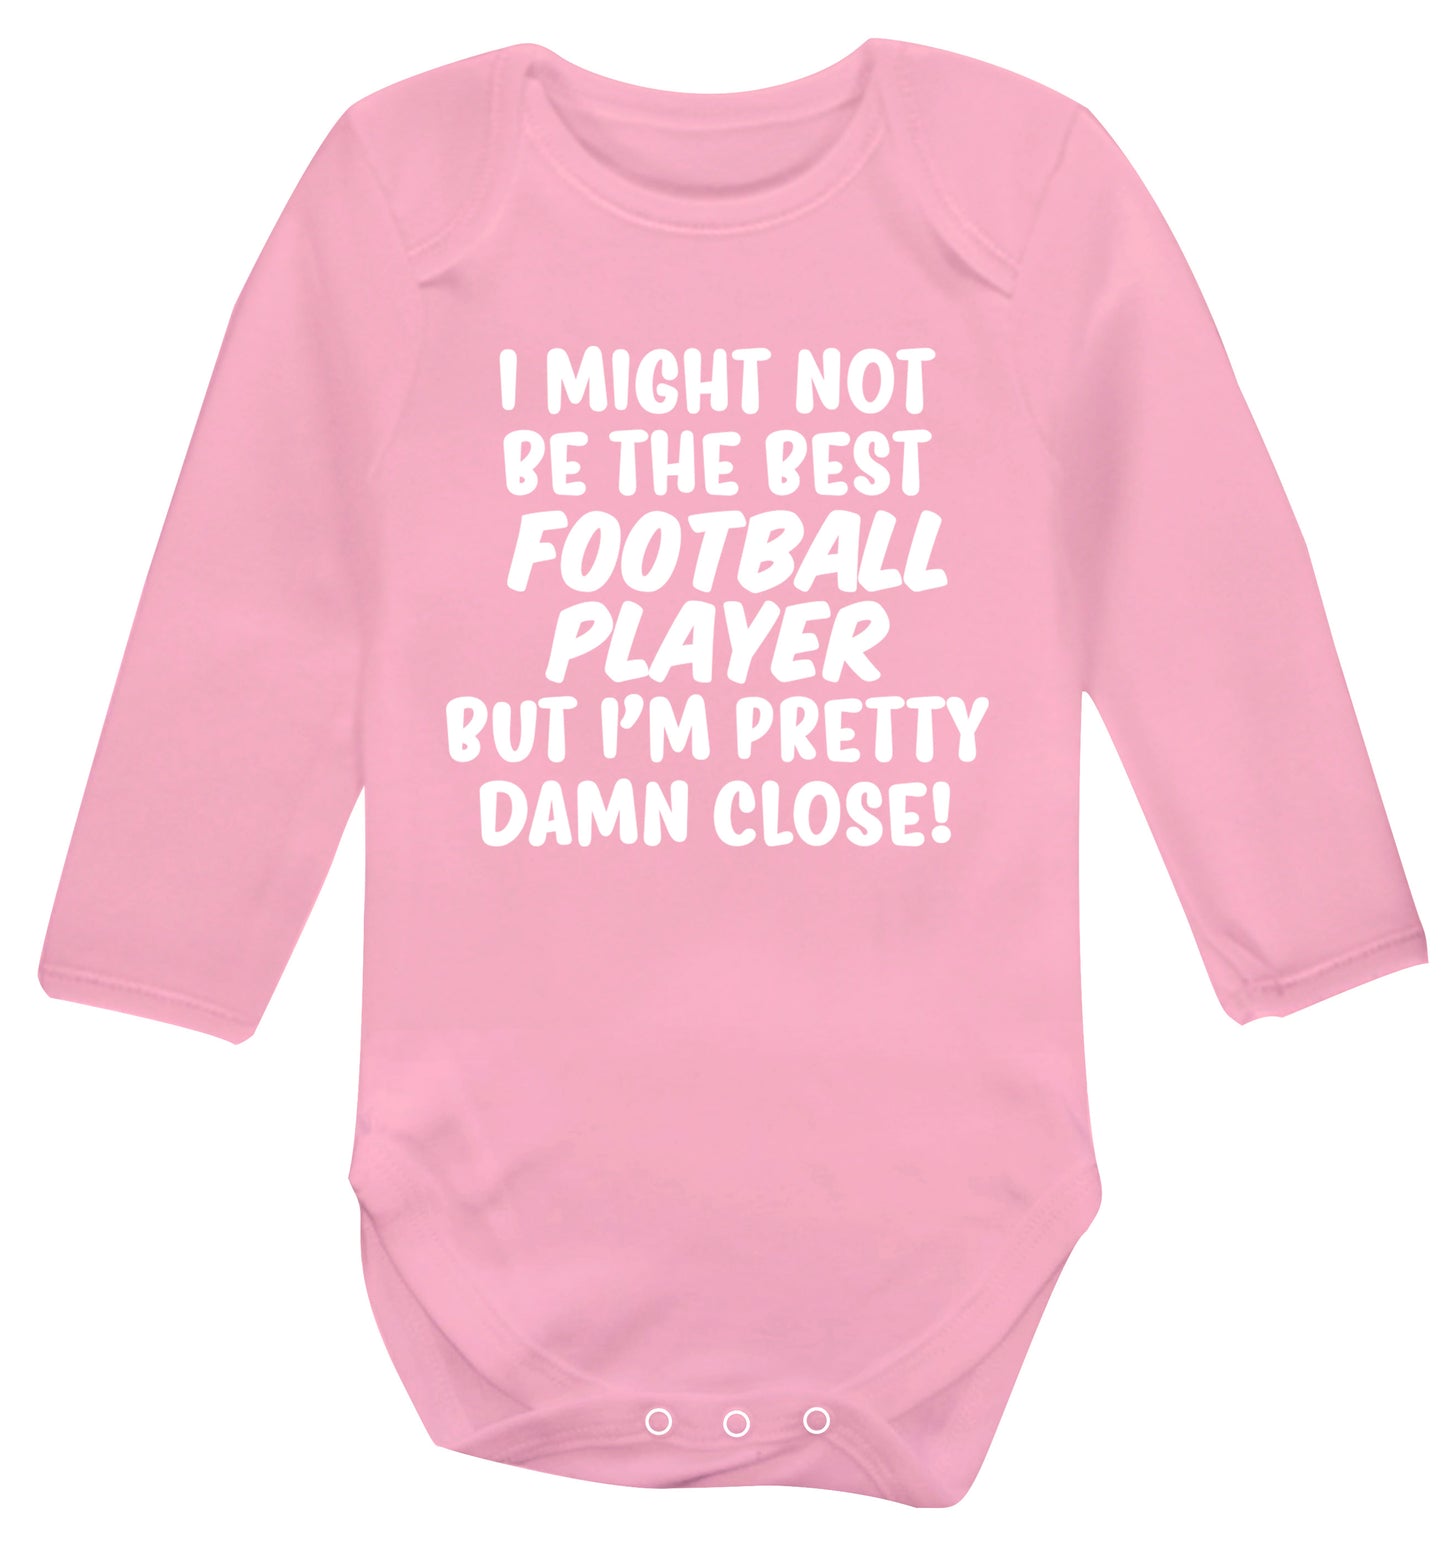 I might not be the best football player but I'm pretty close! Baby Vest long sleeved pale pink 6-12 months